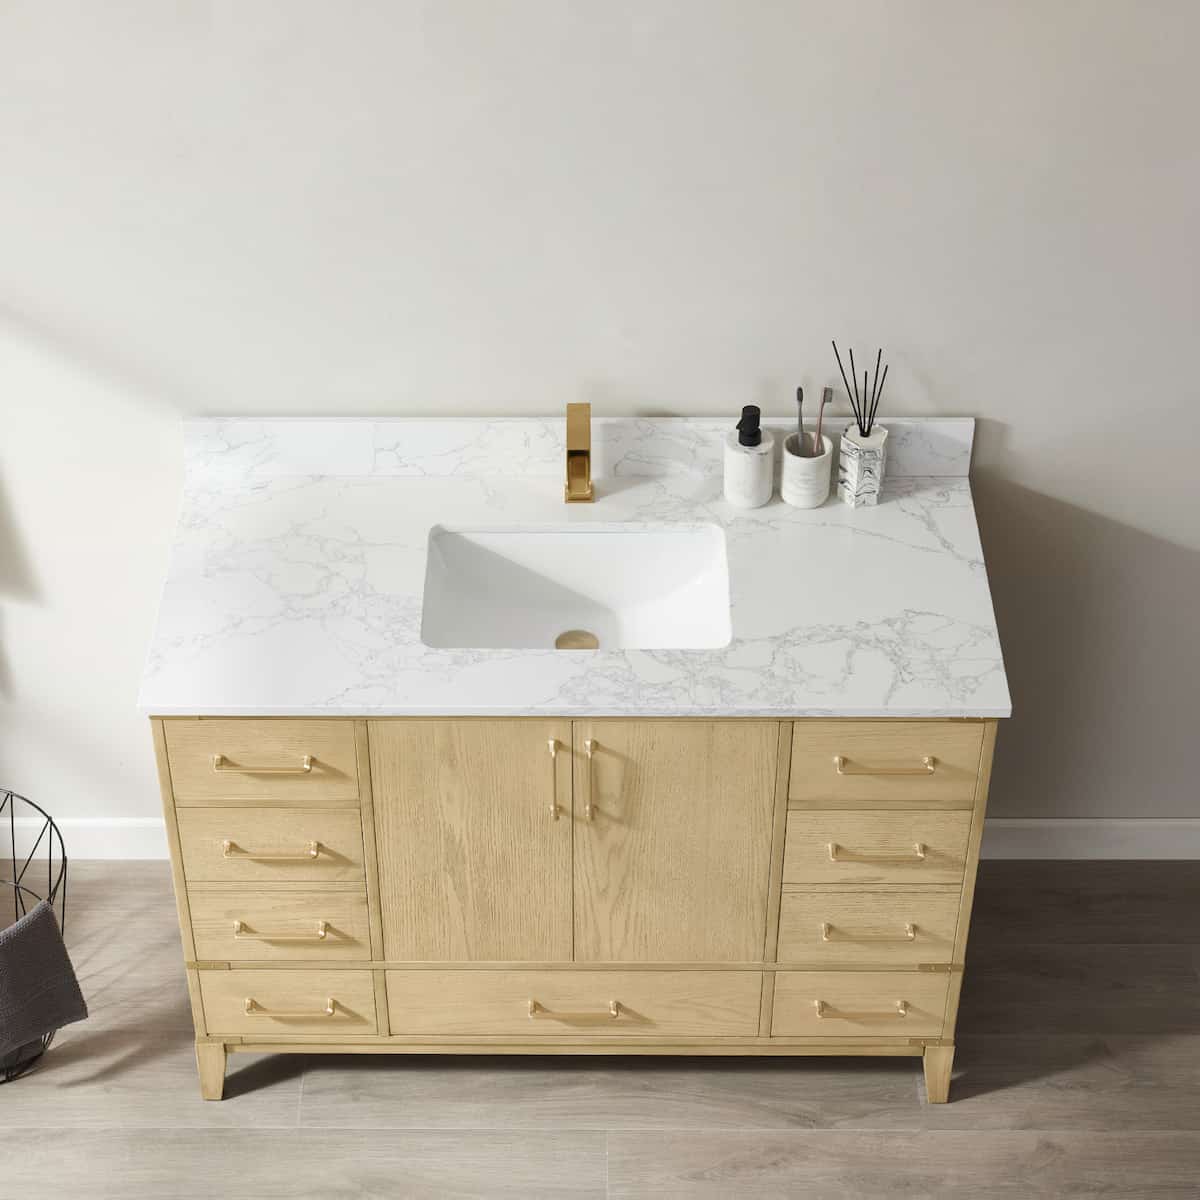 Vinosa Zaragoza 48 Inch Freestanding Single Vanity in Washed Ash with White Composite Grain Stone Countertop Without Mirror Counter 799048-WA-GW-NM